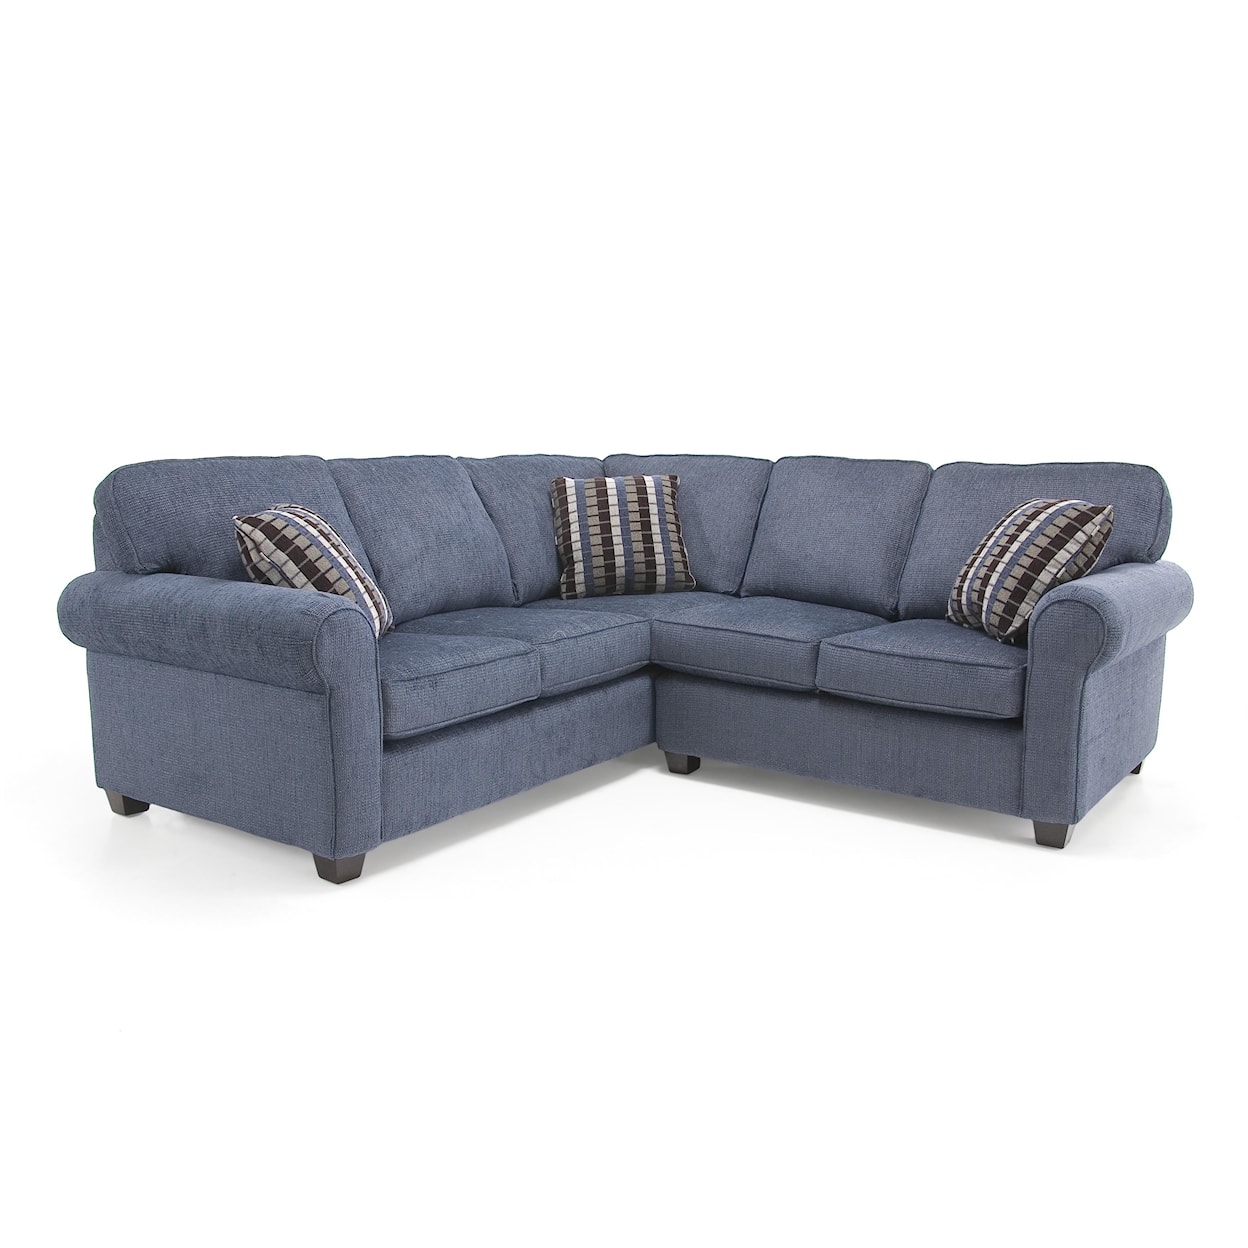 Decor-Rest 2576 Transitional Sectional Sofa